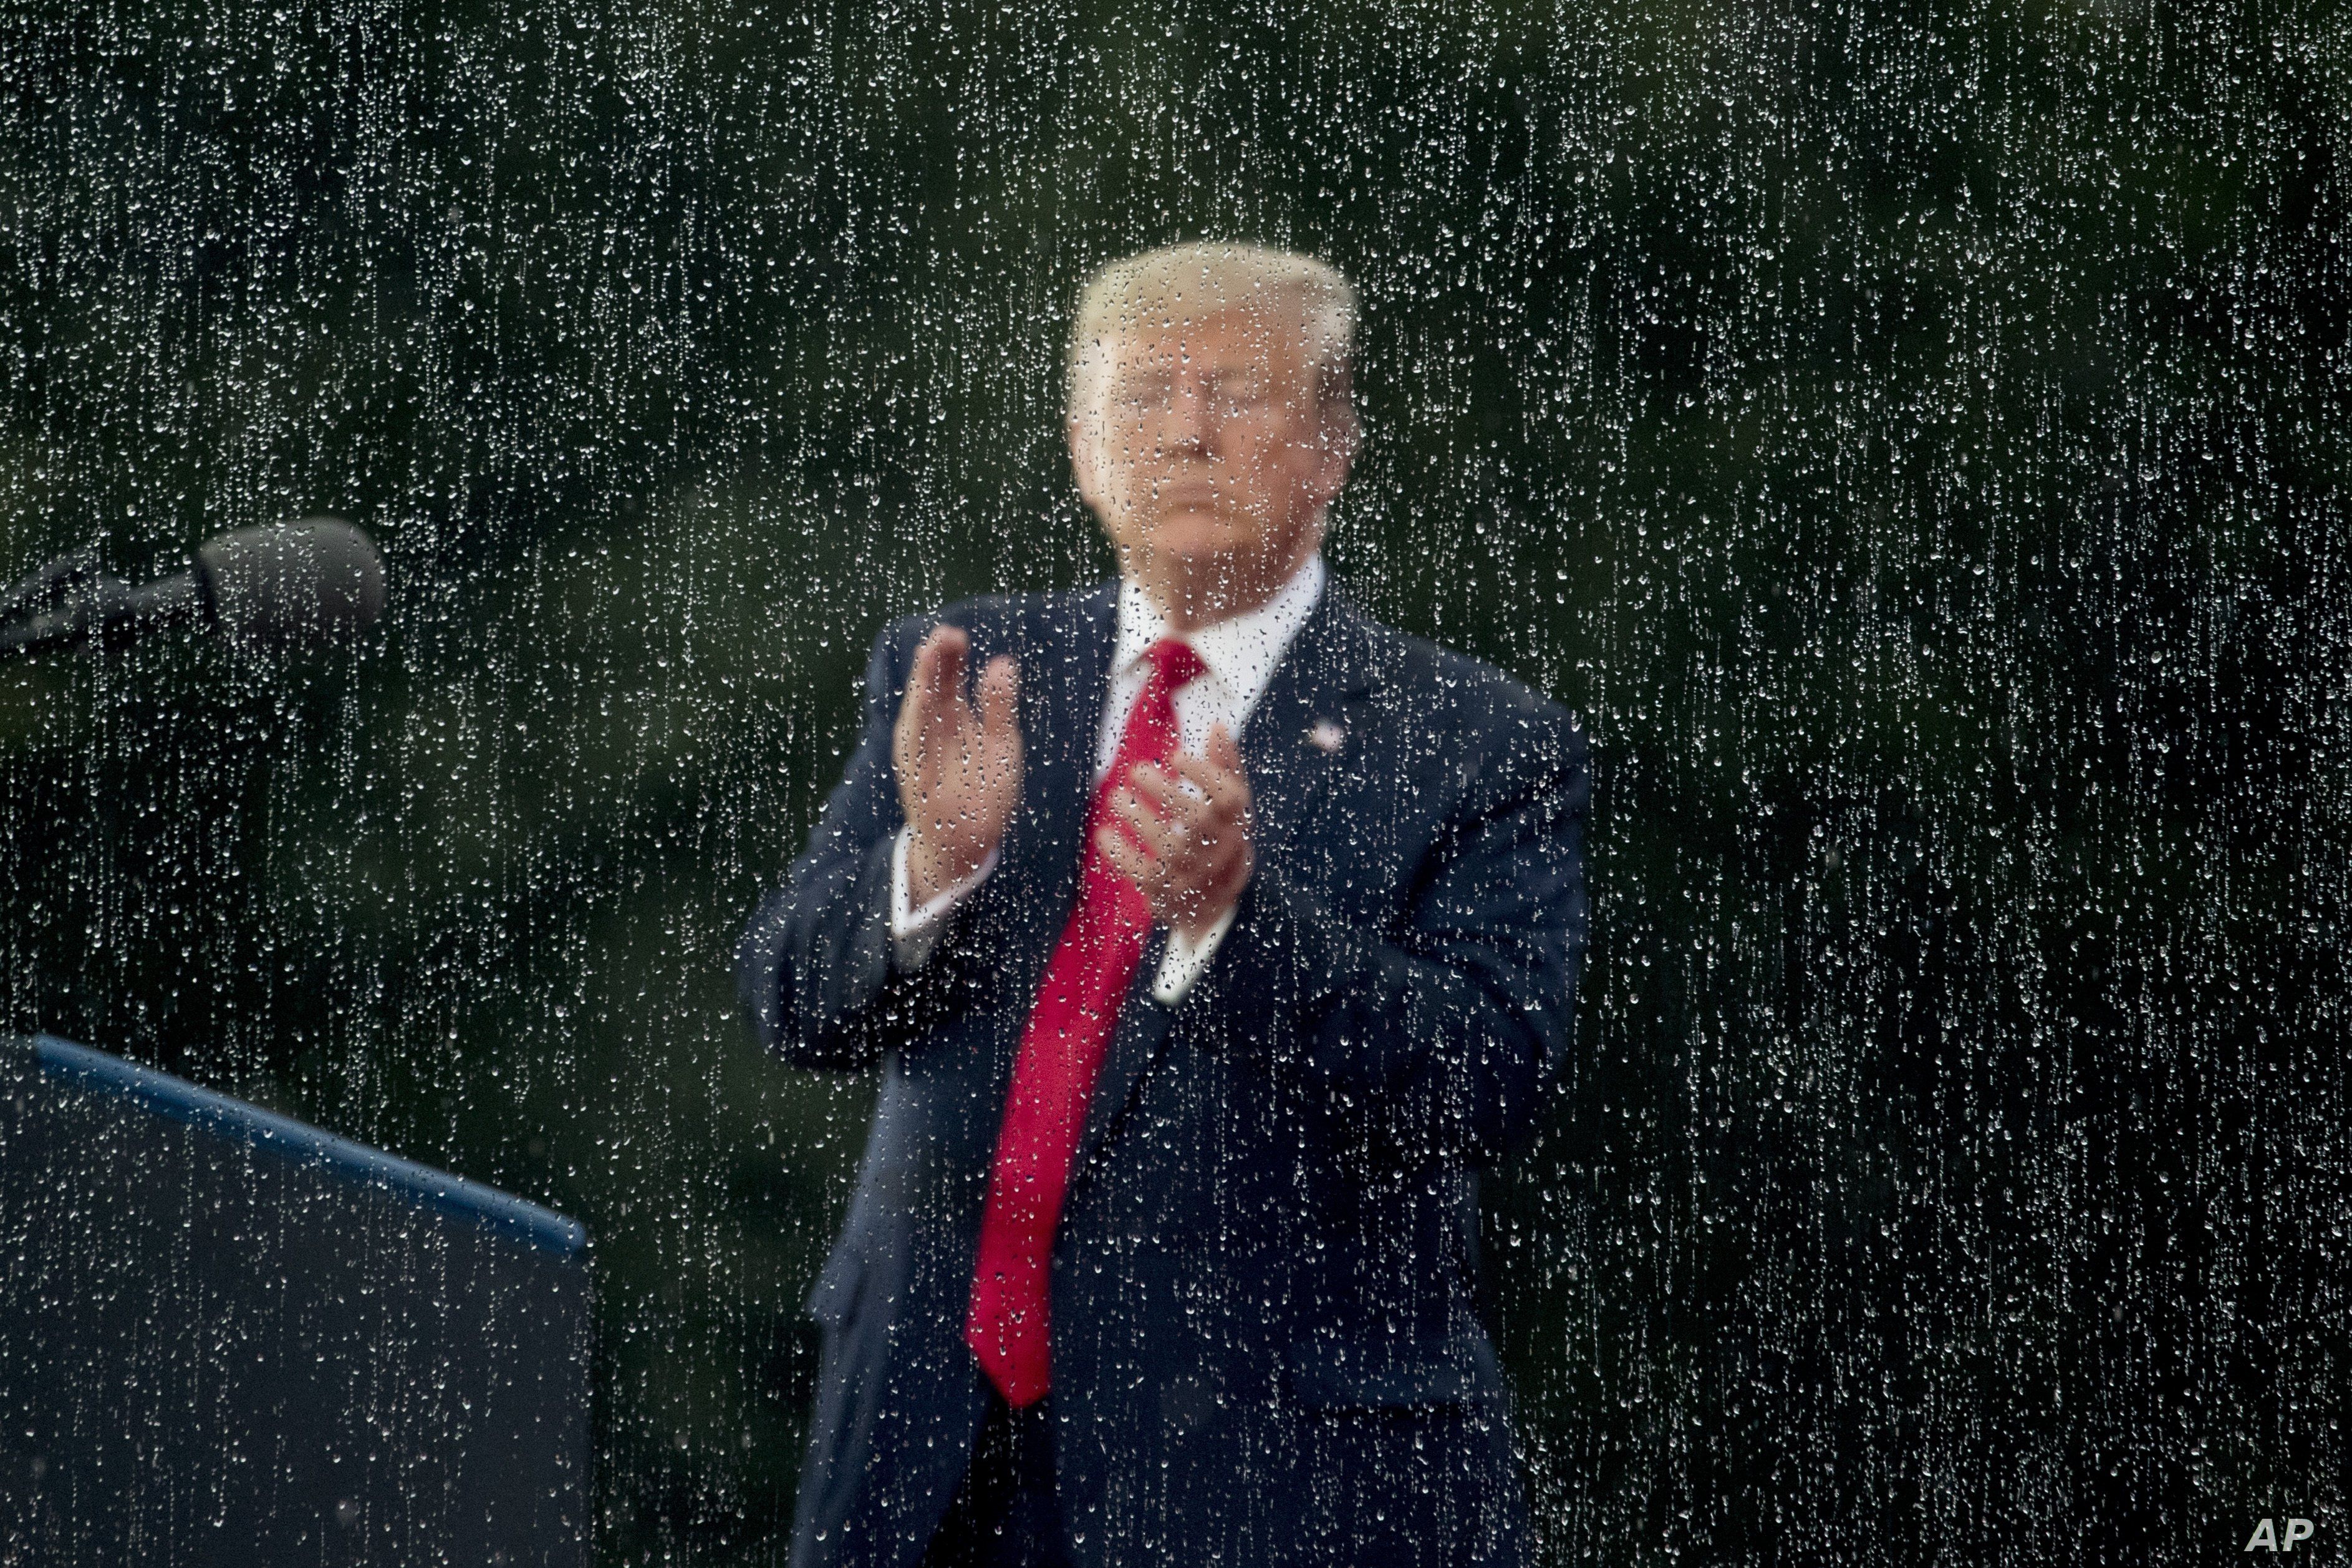 President Donald Trump applauds during an Independence Day celebration in front of the Lincoln Memorial, July 4, 2019, in Washington.